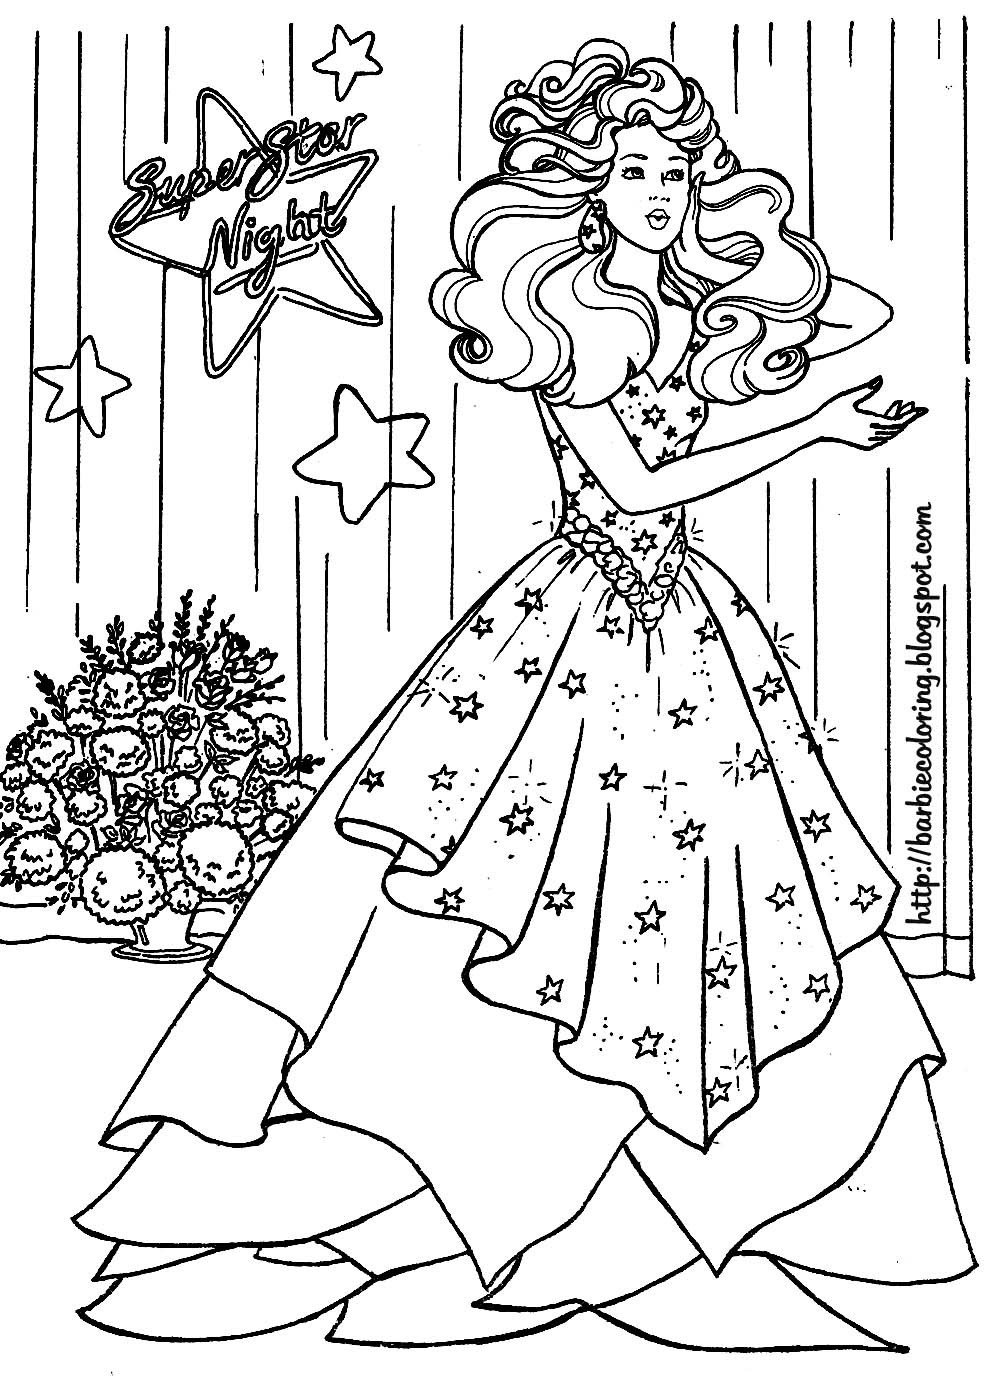 Barbie Coloring Pages For Girls
 BARBIE COLORING PAGES BARBIE BRIDE AND BARBIE SUPERSTAR